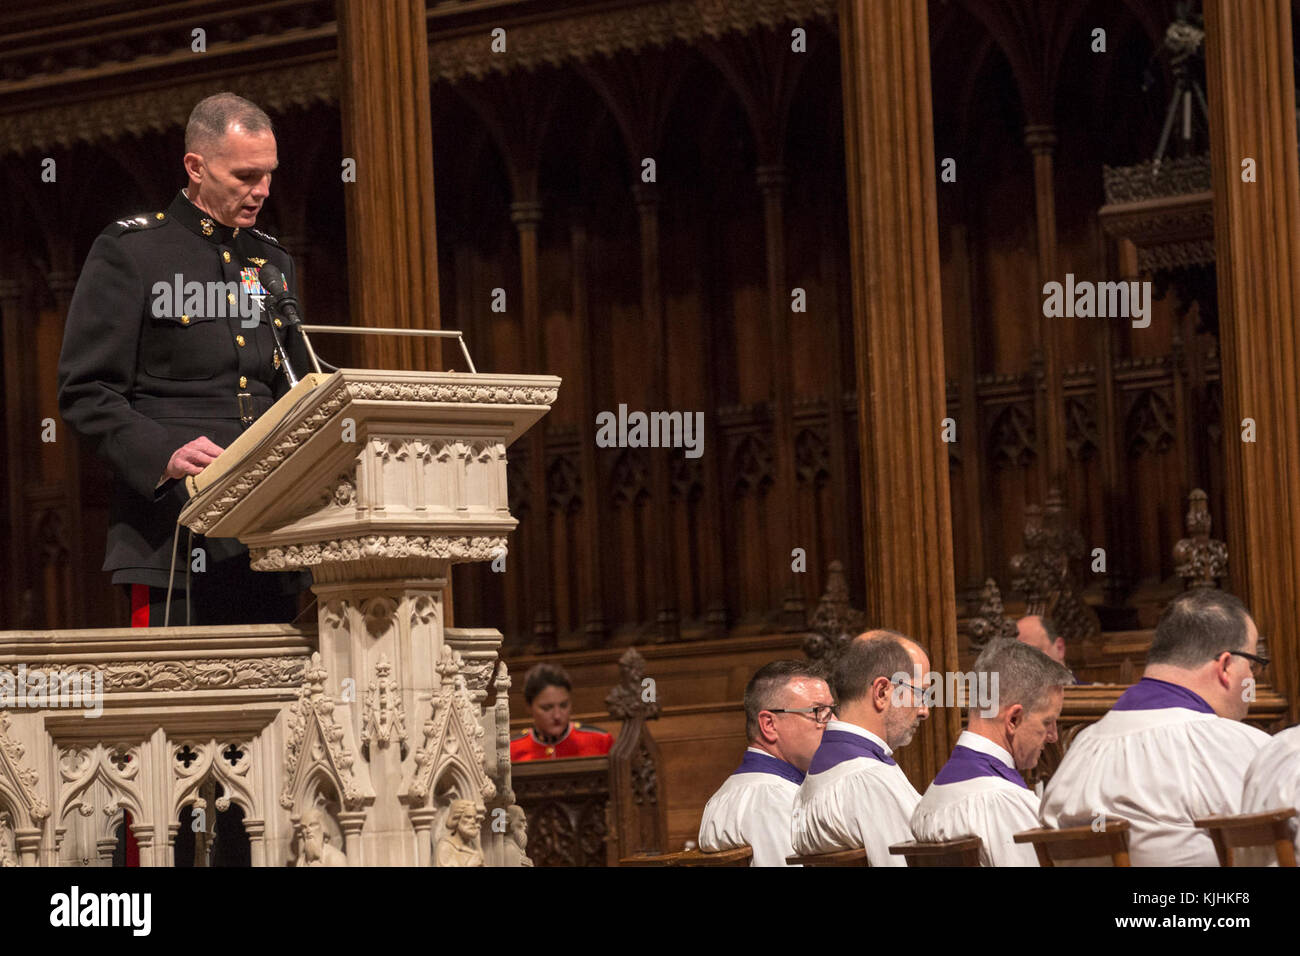 U.S. Marine Corps Lt. Gen. Gary L. Thomas, deputy commandant, Programs and Resources, gives remarks during the Marine Corps Worship Service at the Washington National Cathedral,Washington, D.C., Nov. 12, 2017. The worship service honored the Marines Corps' 242nd anniversary. (U.S. Marine Corps photo by Lance Cpl. Alex A. Quiles) Stock Photo